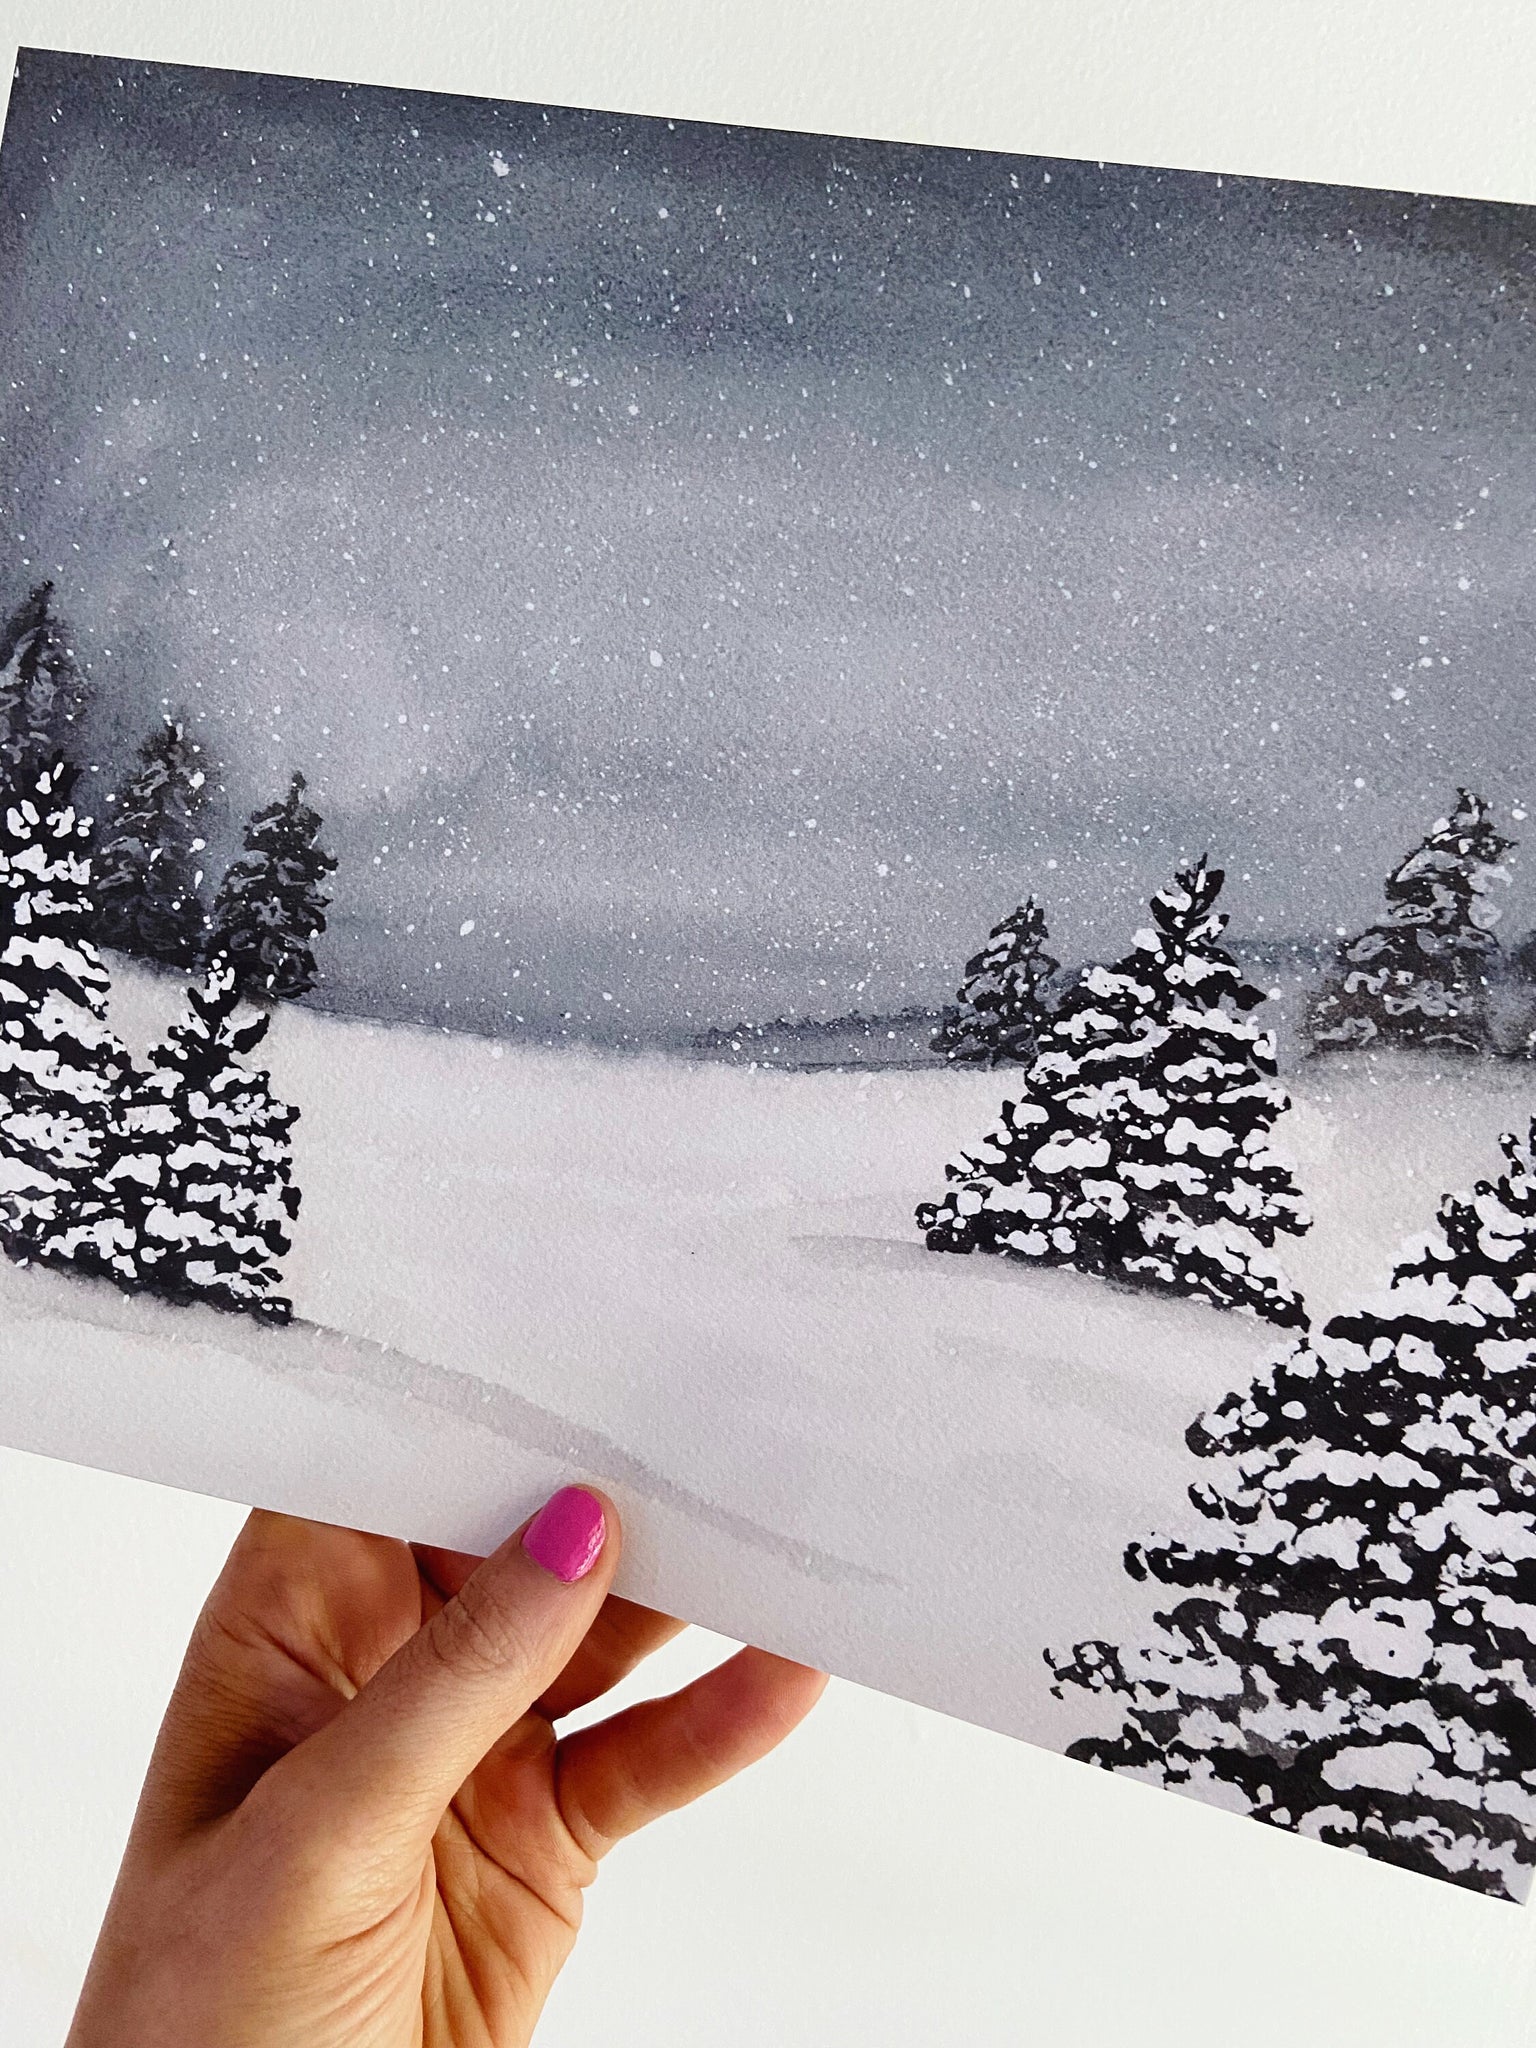 Landscape, Pastel Drawing, Winter Painting, Winter Scene, Original  Painting, Winter Landscape, Winter Decor, Snow and Mountains, Artwork - Etsy